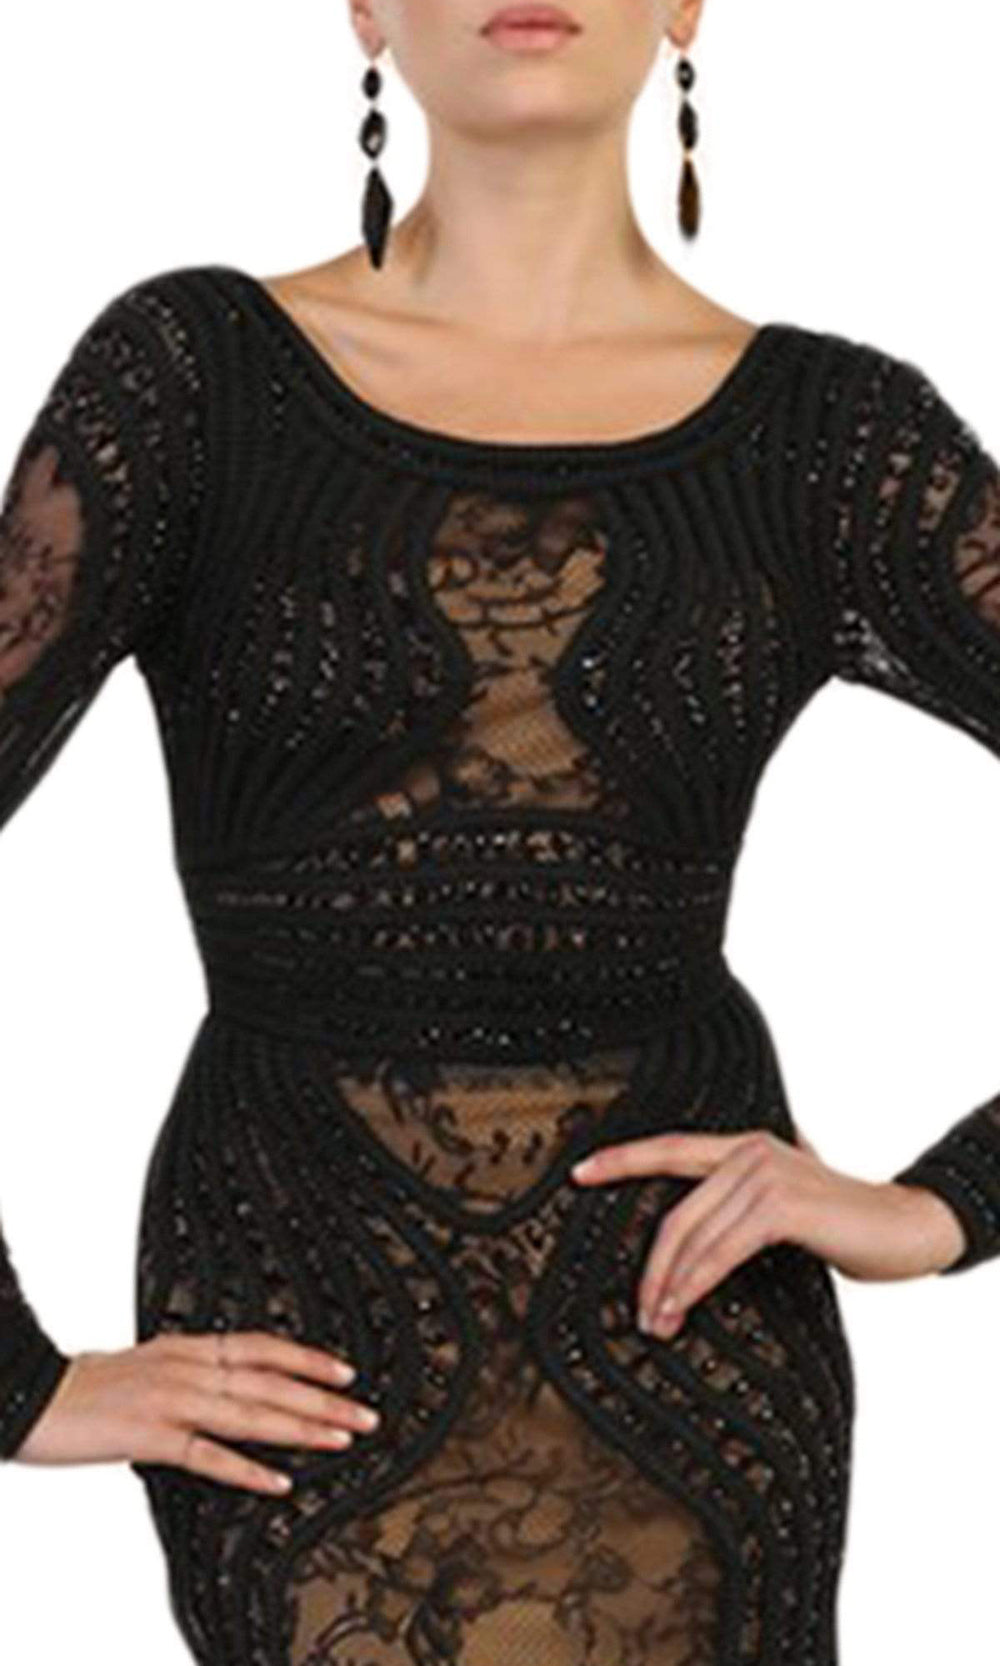 May Queen - Lace Embellished Bateau Mermaid Gown RQ7515 - 1 pc Black In Size 8 Available CCSALE 8 / Black